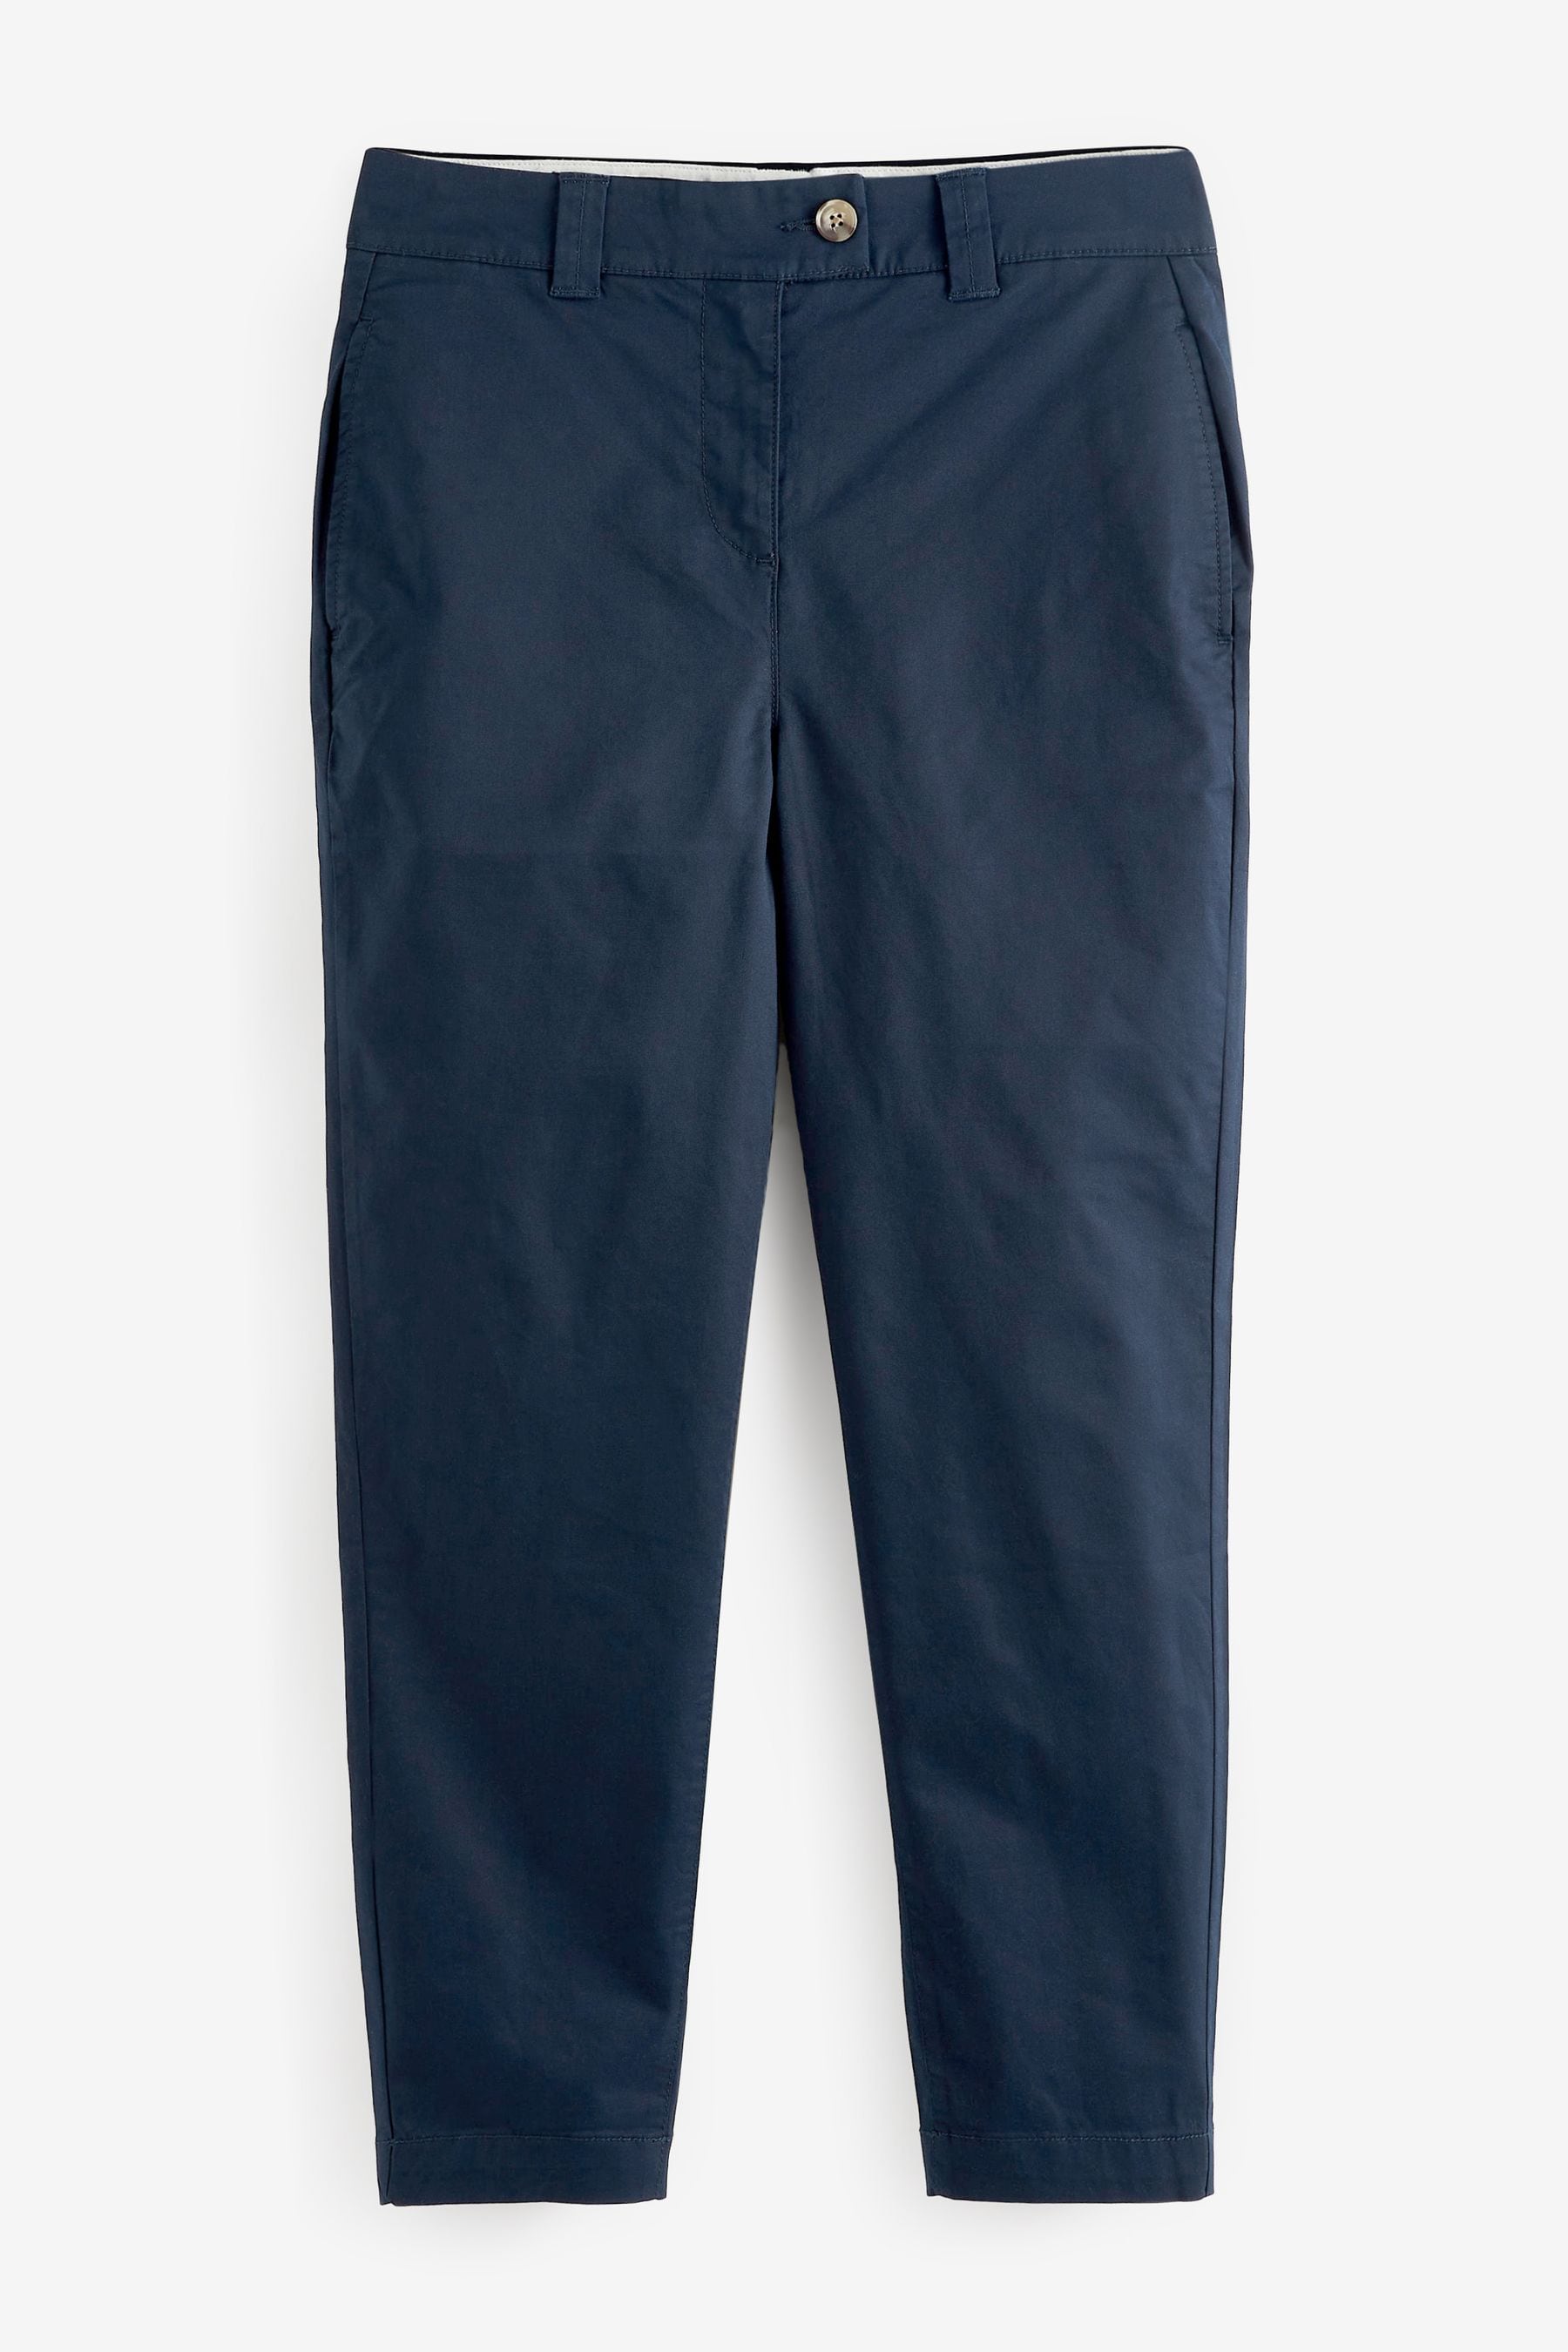 Buy The Ultimate Cotton Rich Chino Trousers from Next Australia